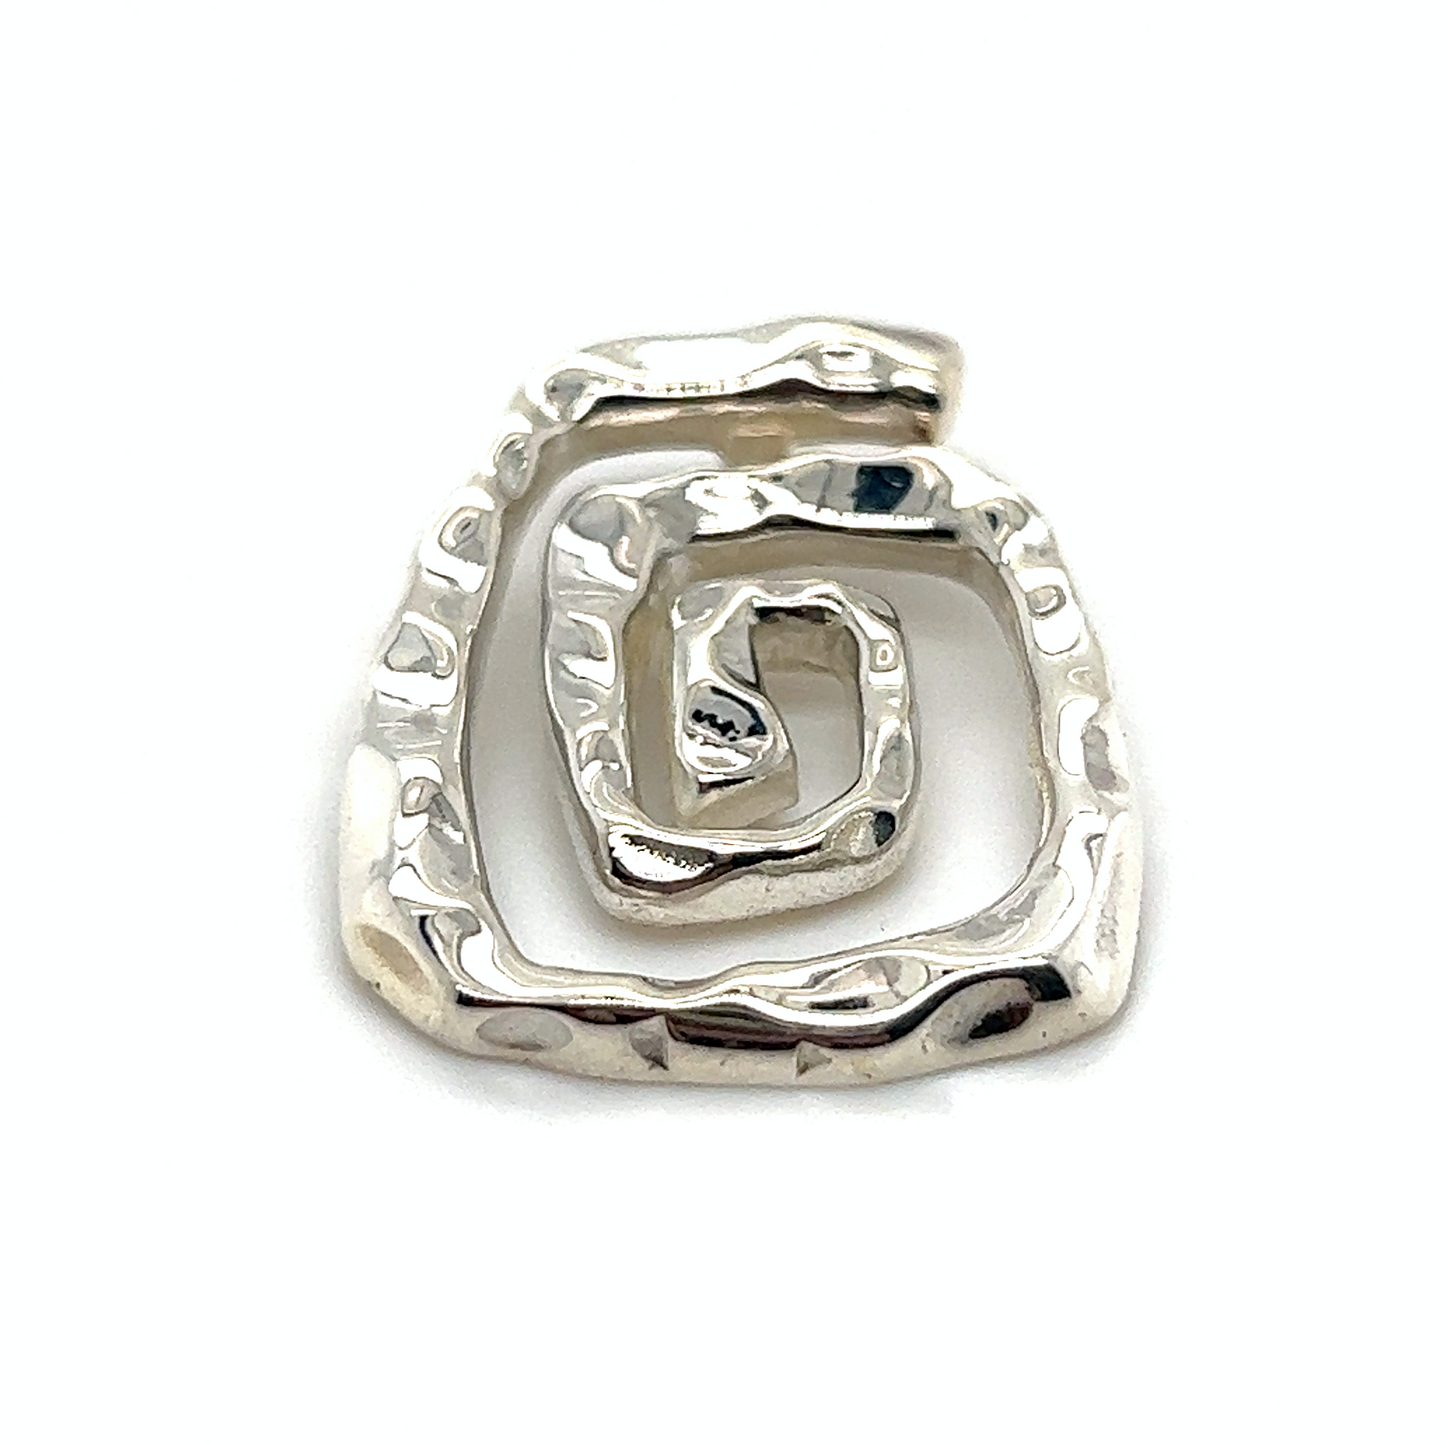 A Stunning Hammered Spiral Pendant by Super Silver on a white background.